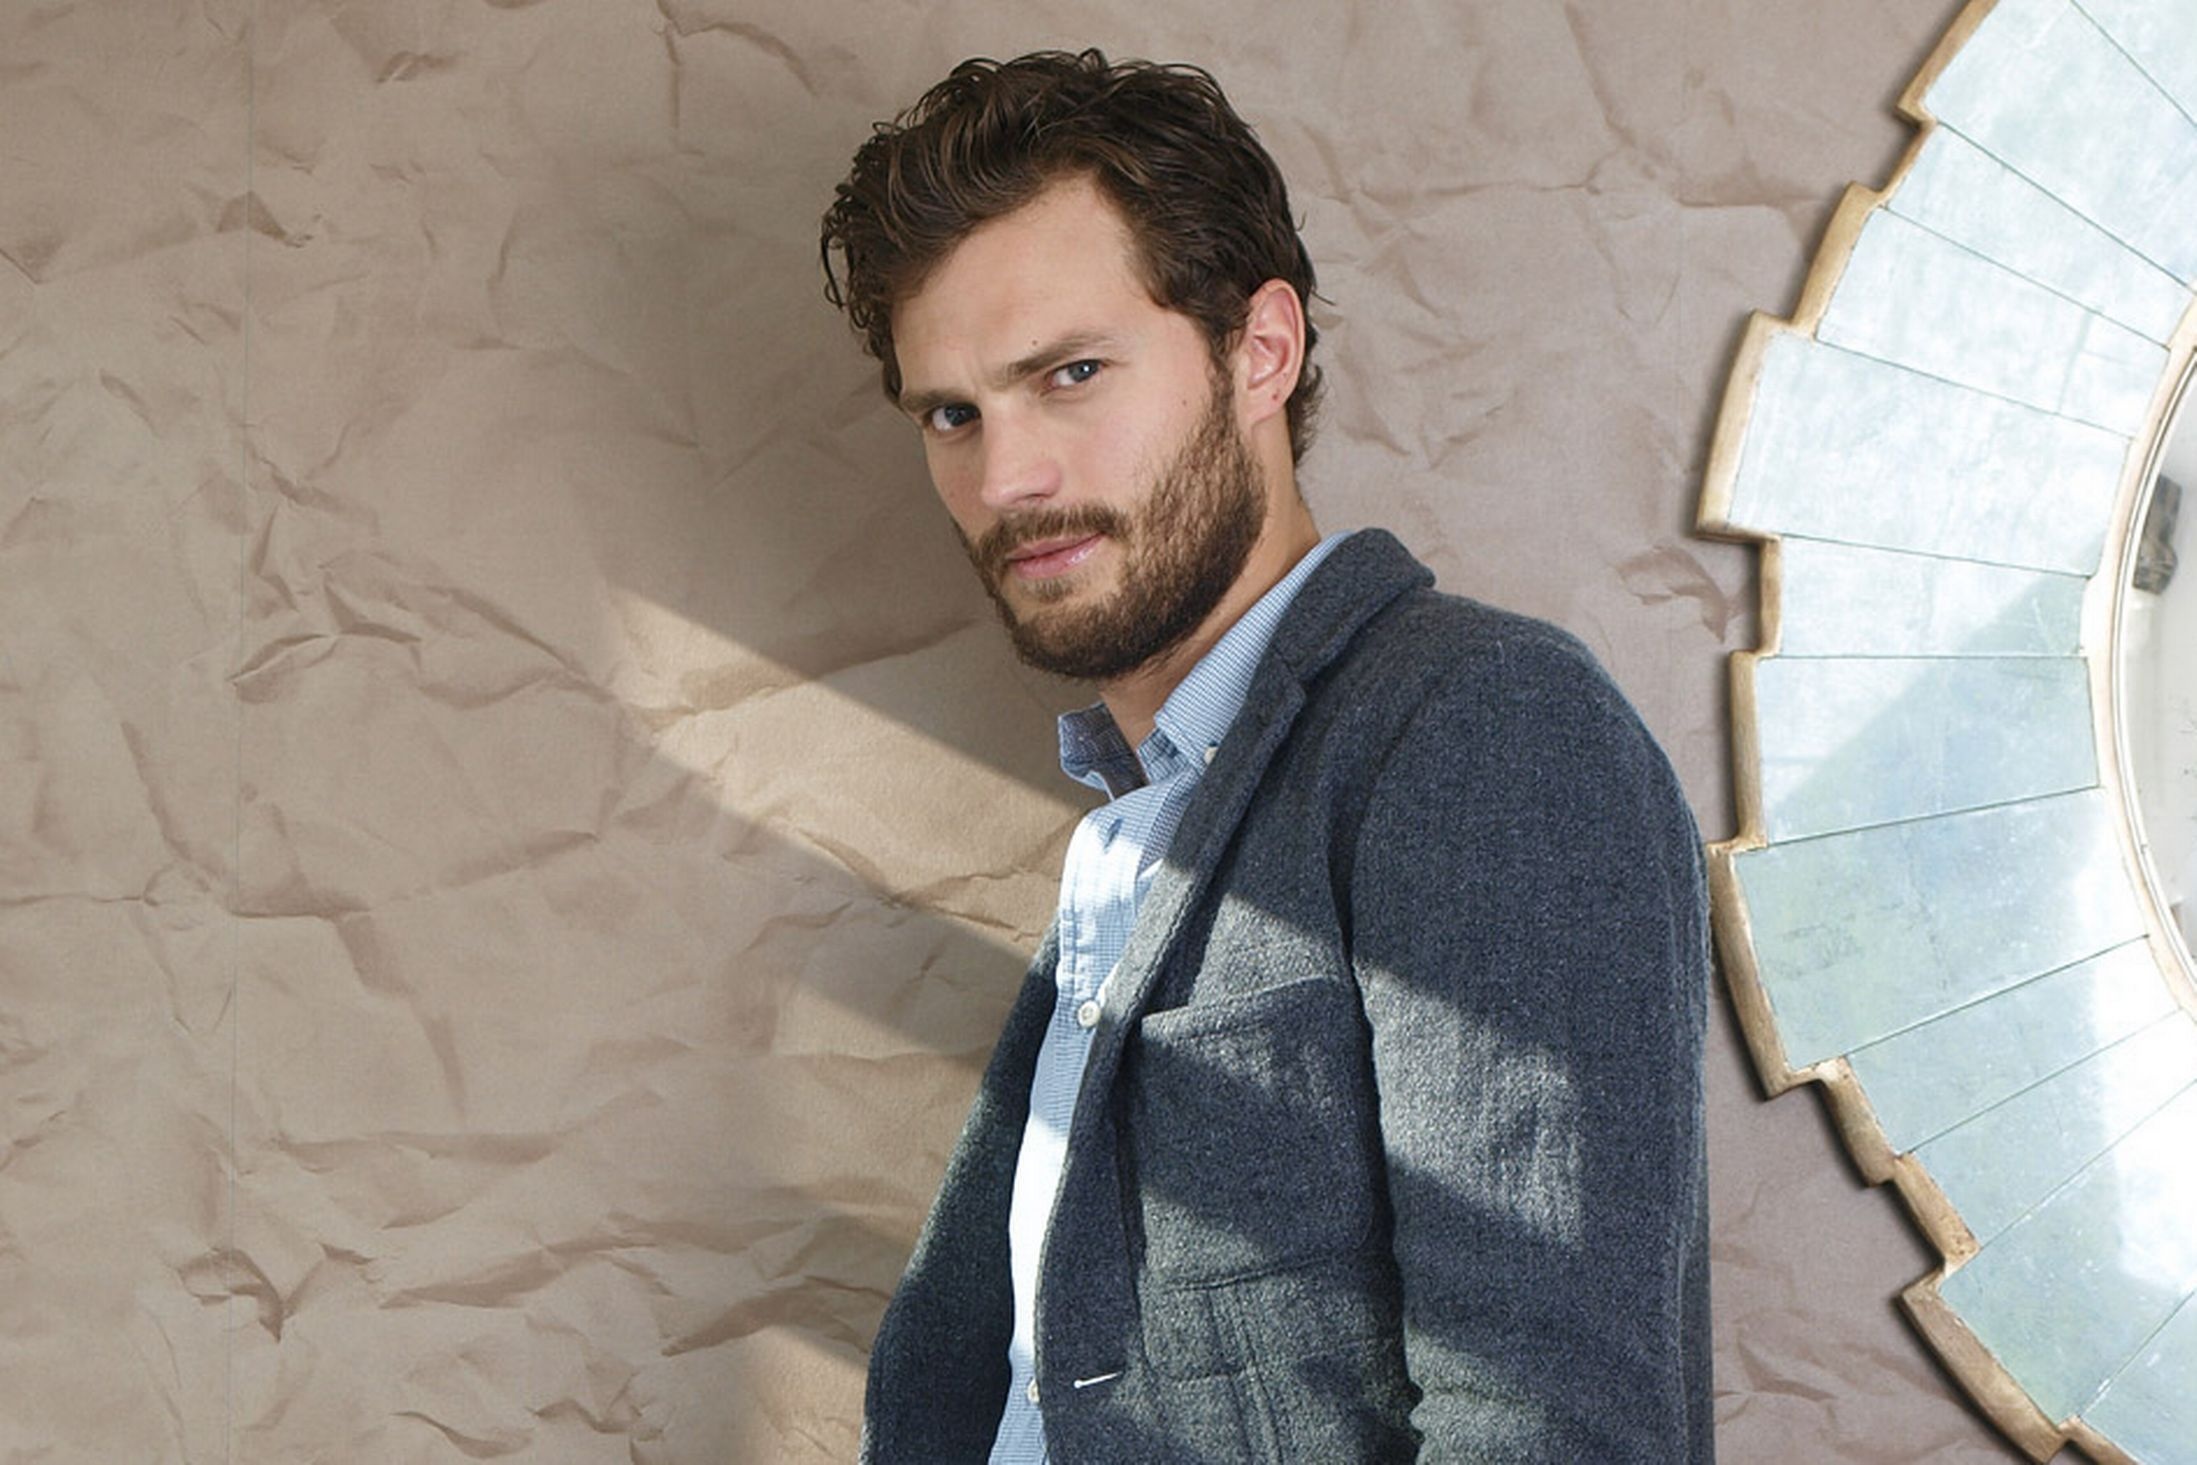 Jamie Dornan: Ranked one of the “25 Biggest Male Models of All Time” by Vogue in 2015. 2200x1470 HD Background.